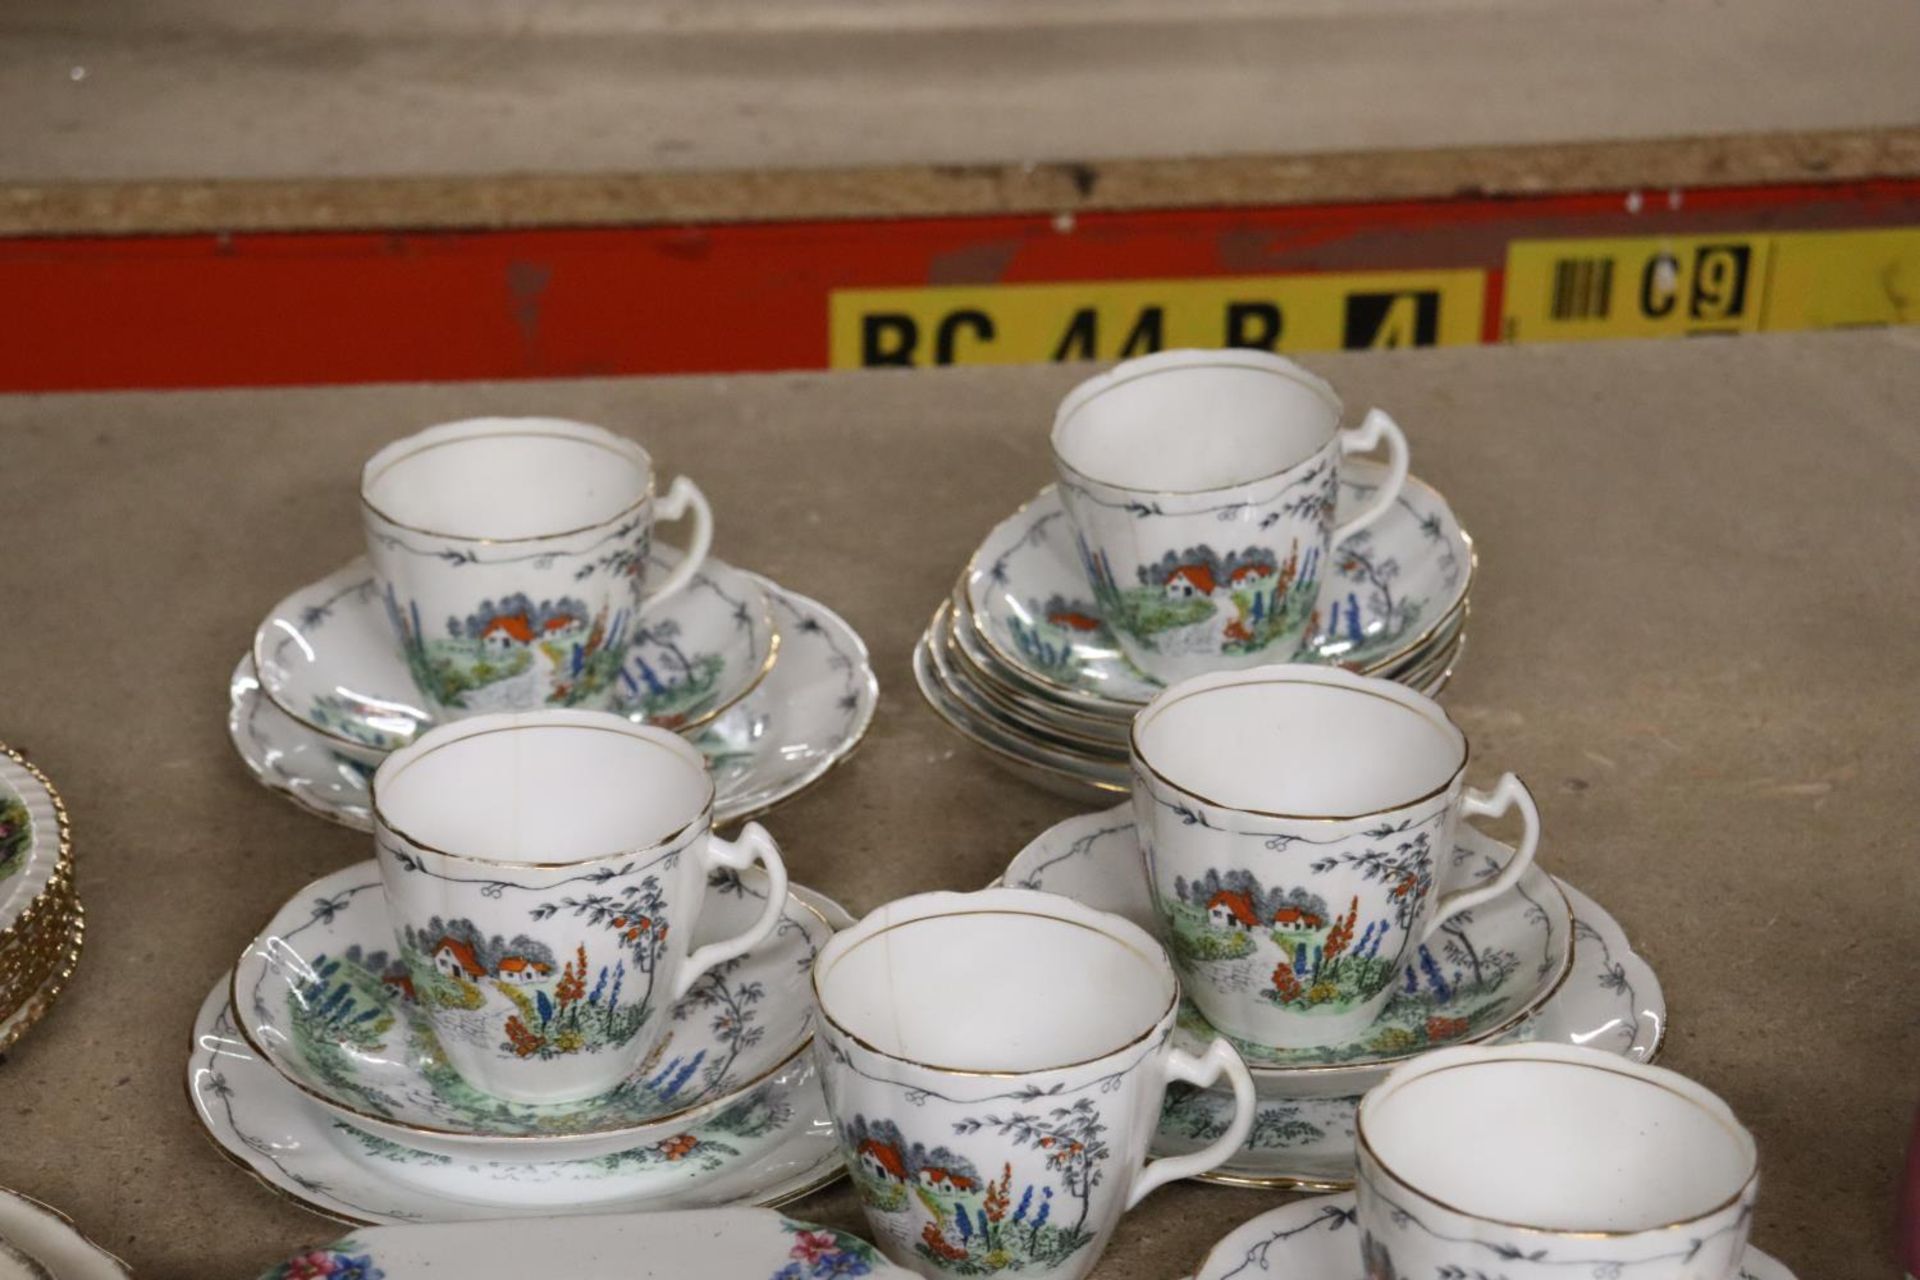 A QUANTITY OF VINTAGE CHINA CUPS, SAUCERS AND PLATES - Image 2 of 4